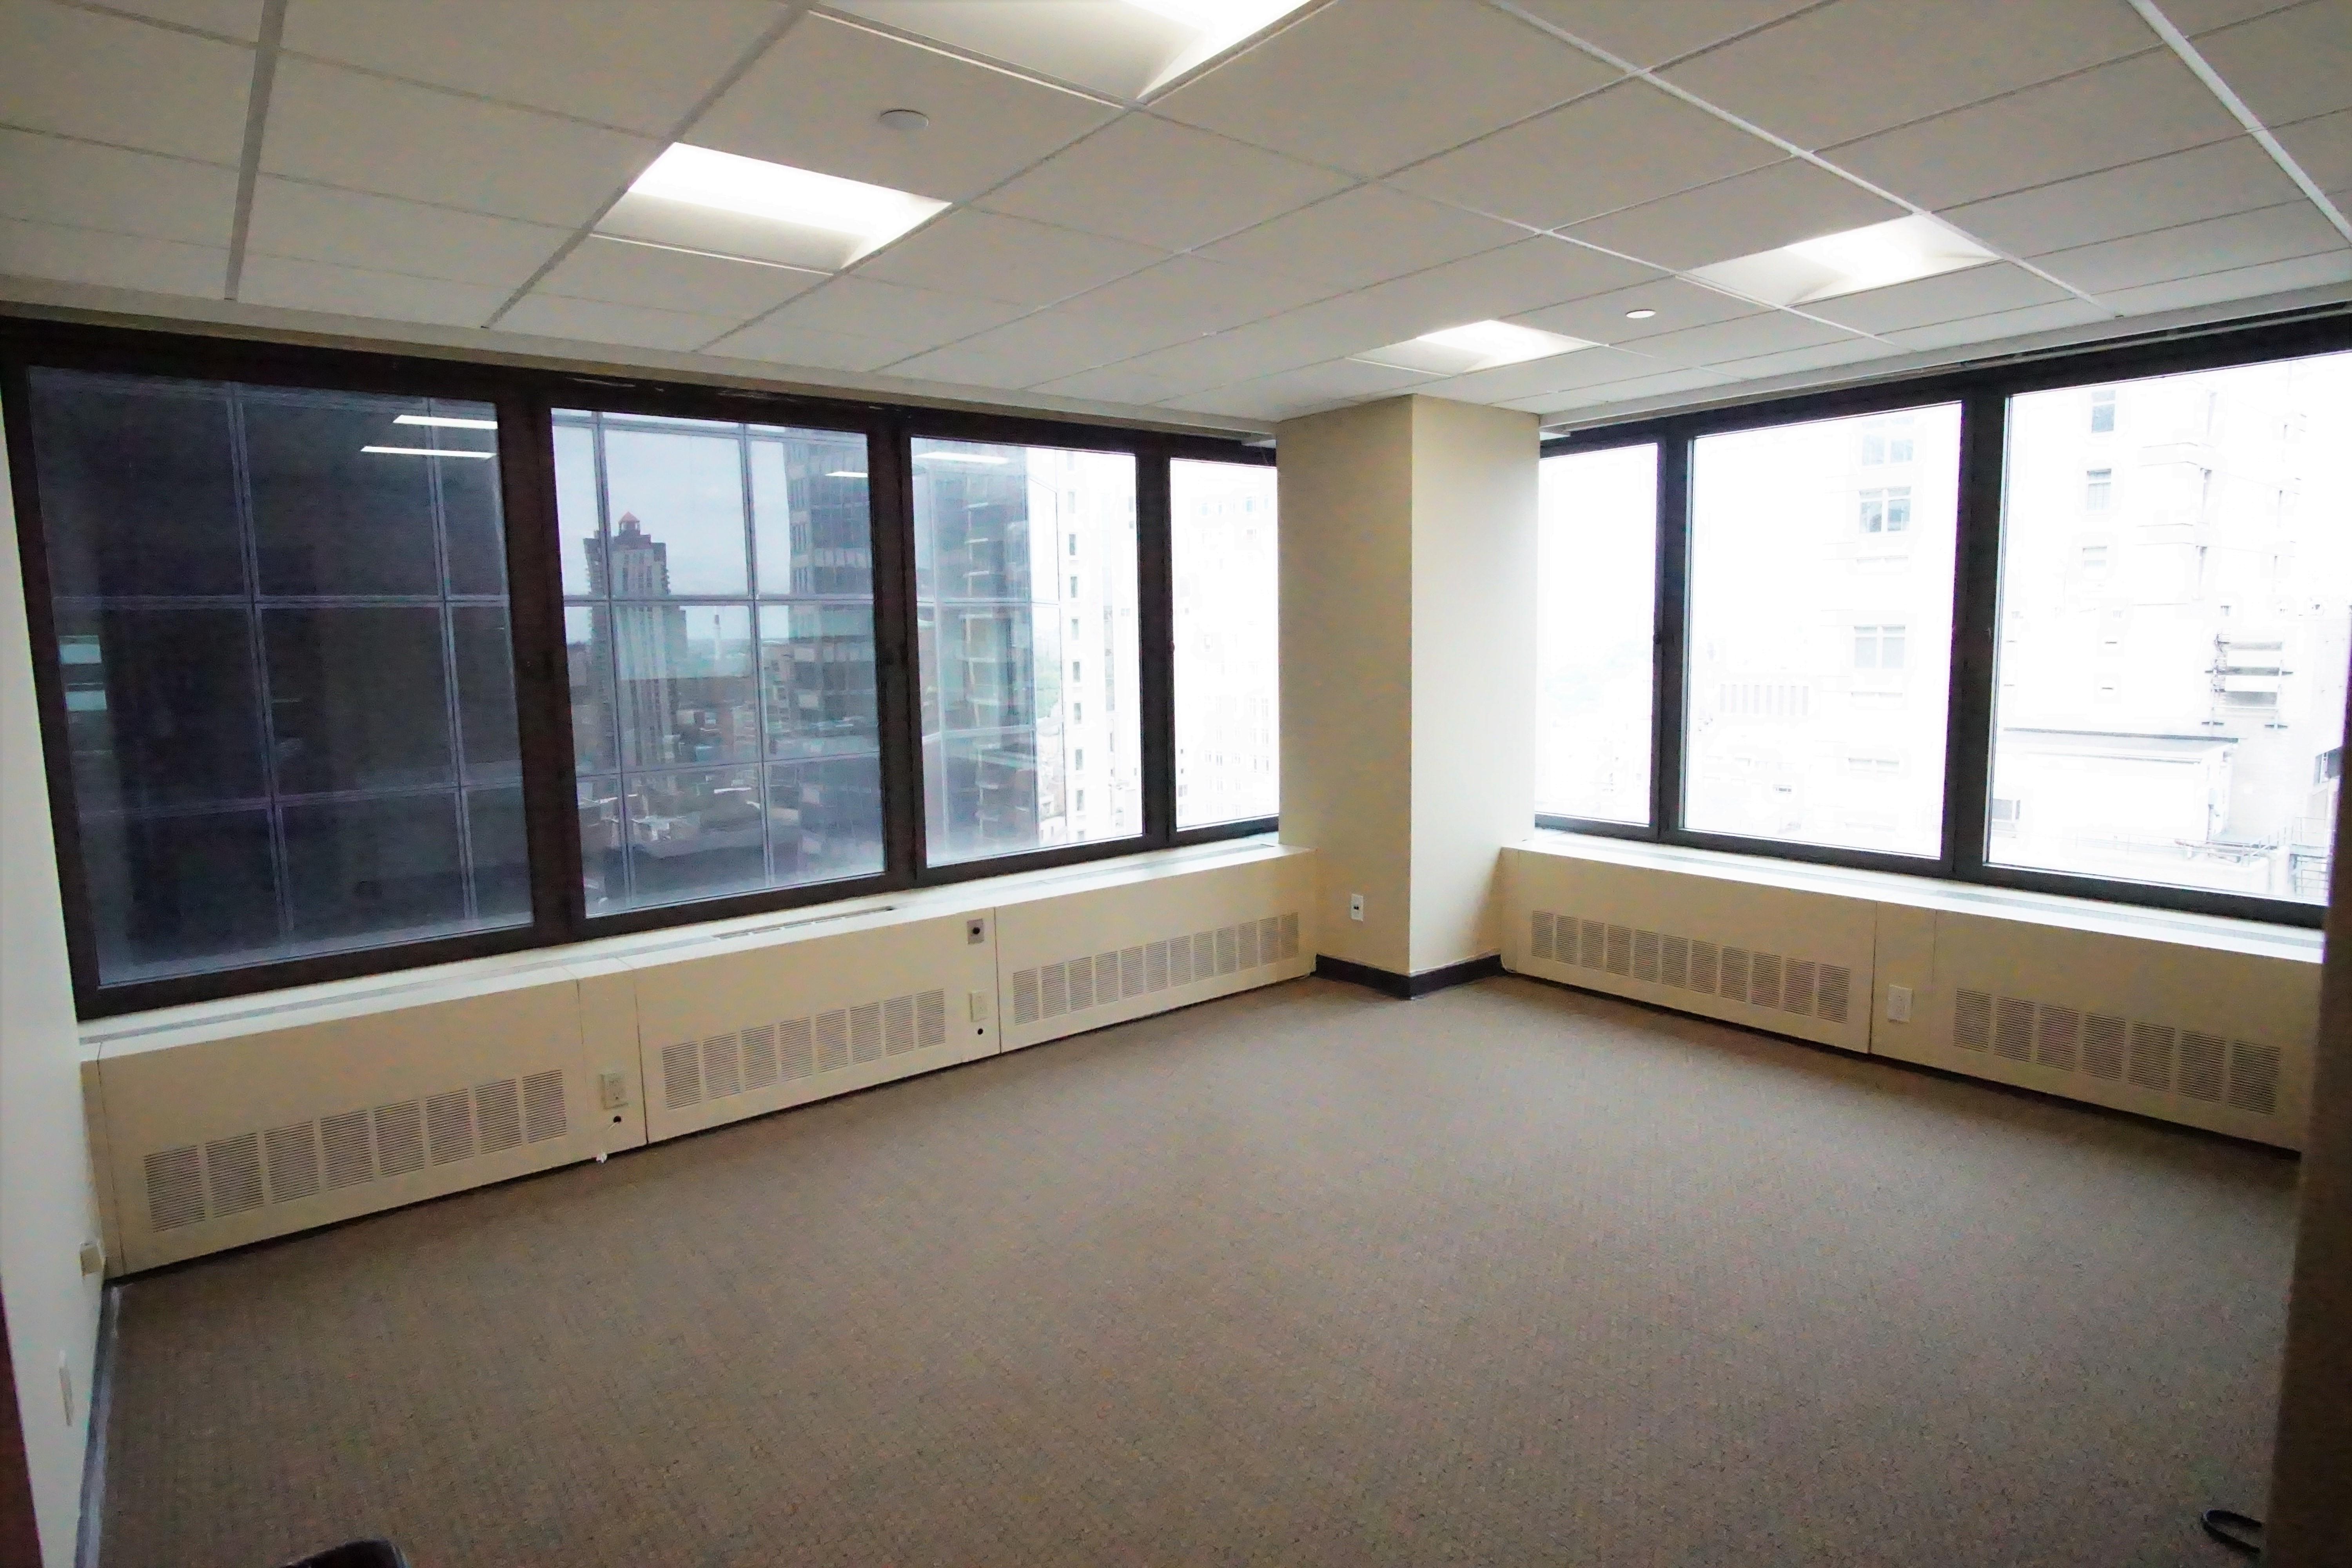 110 East 59th Street New York NY The exceptionally priced corner office